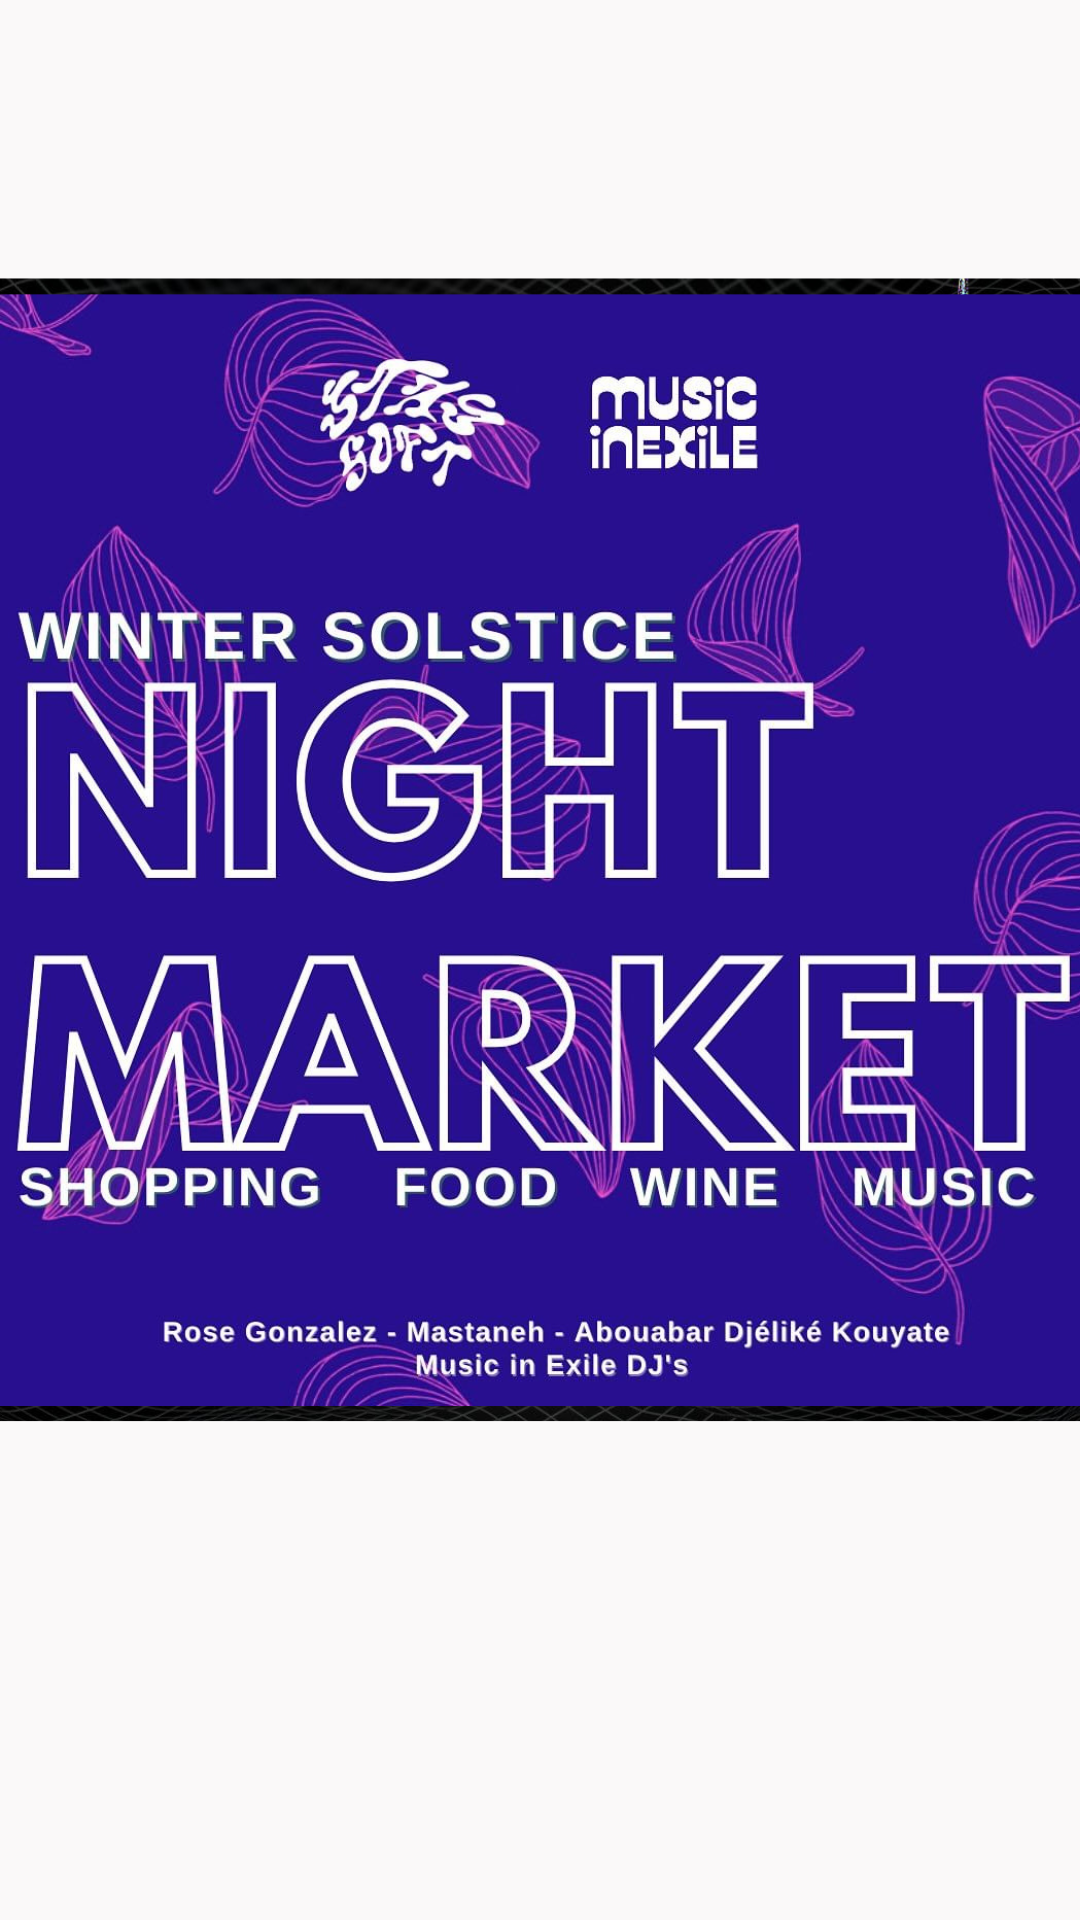 Image for the upcoming Night Market in collaboration with Music in Exile including shopping, food, wine and music